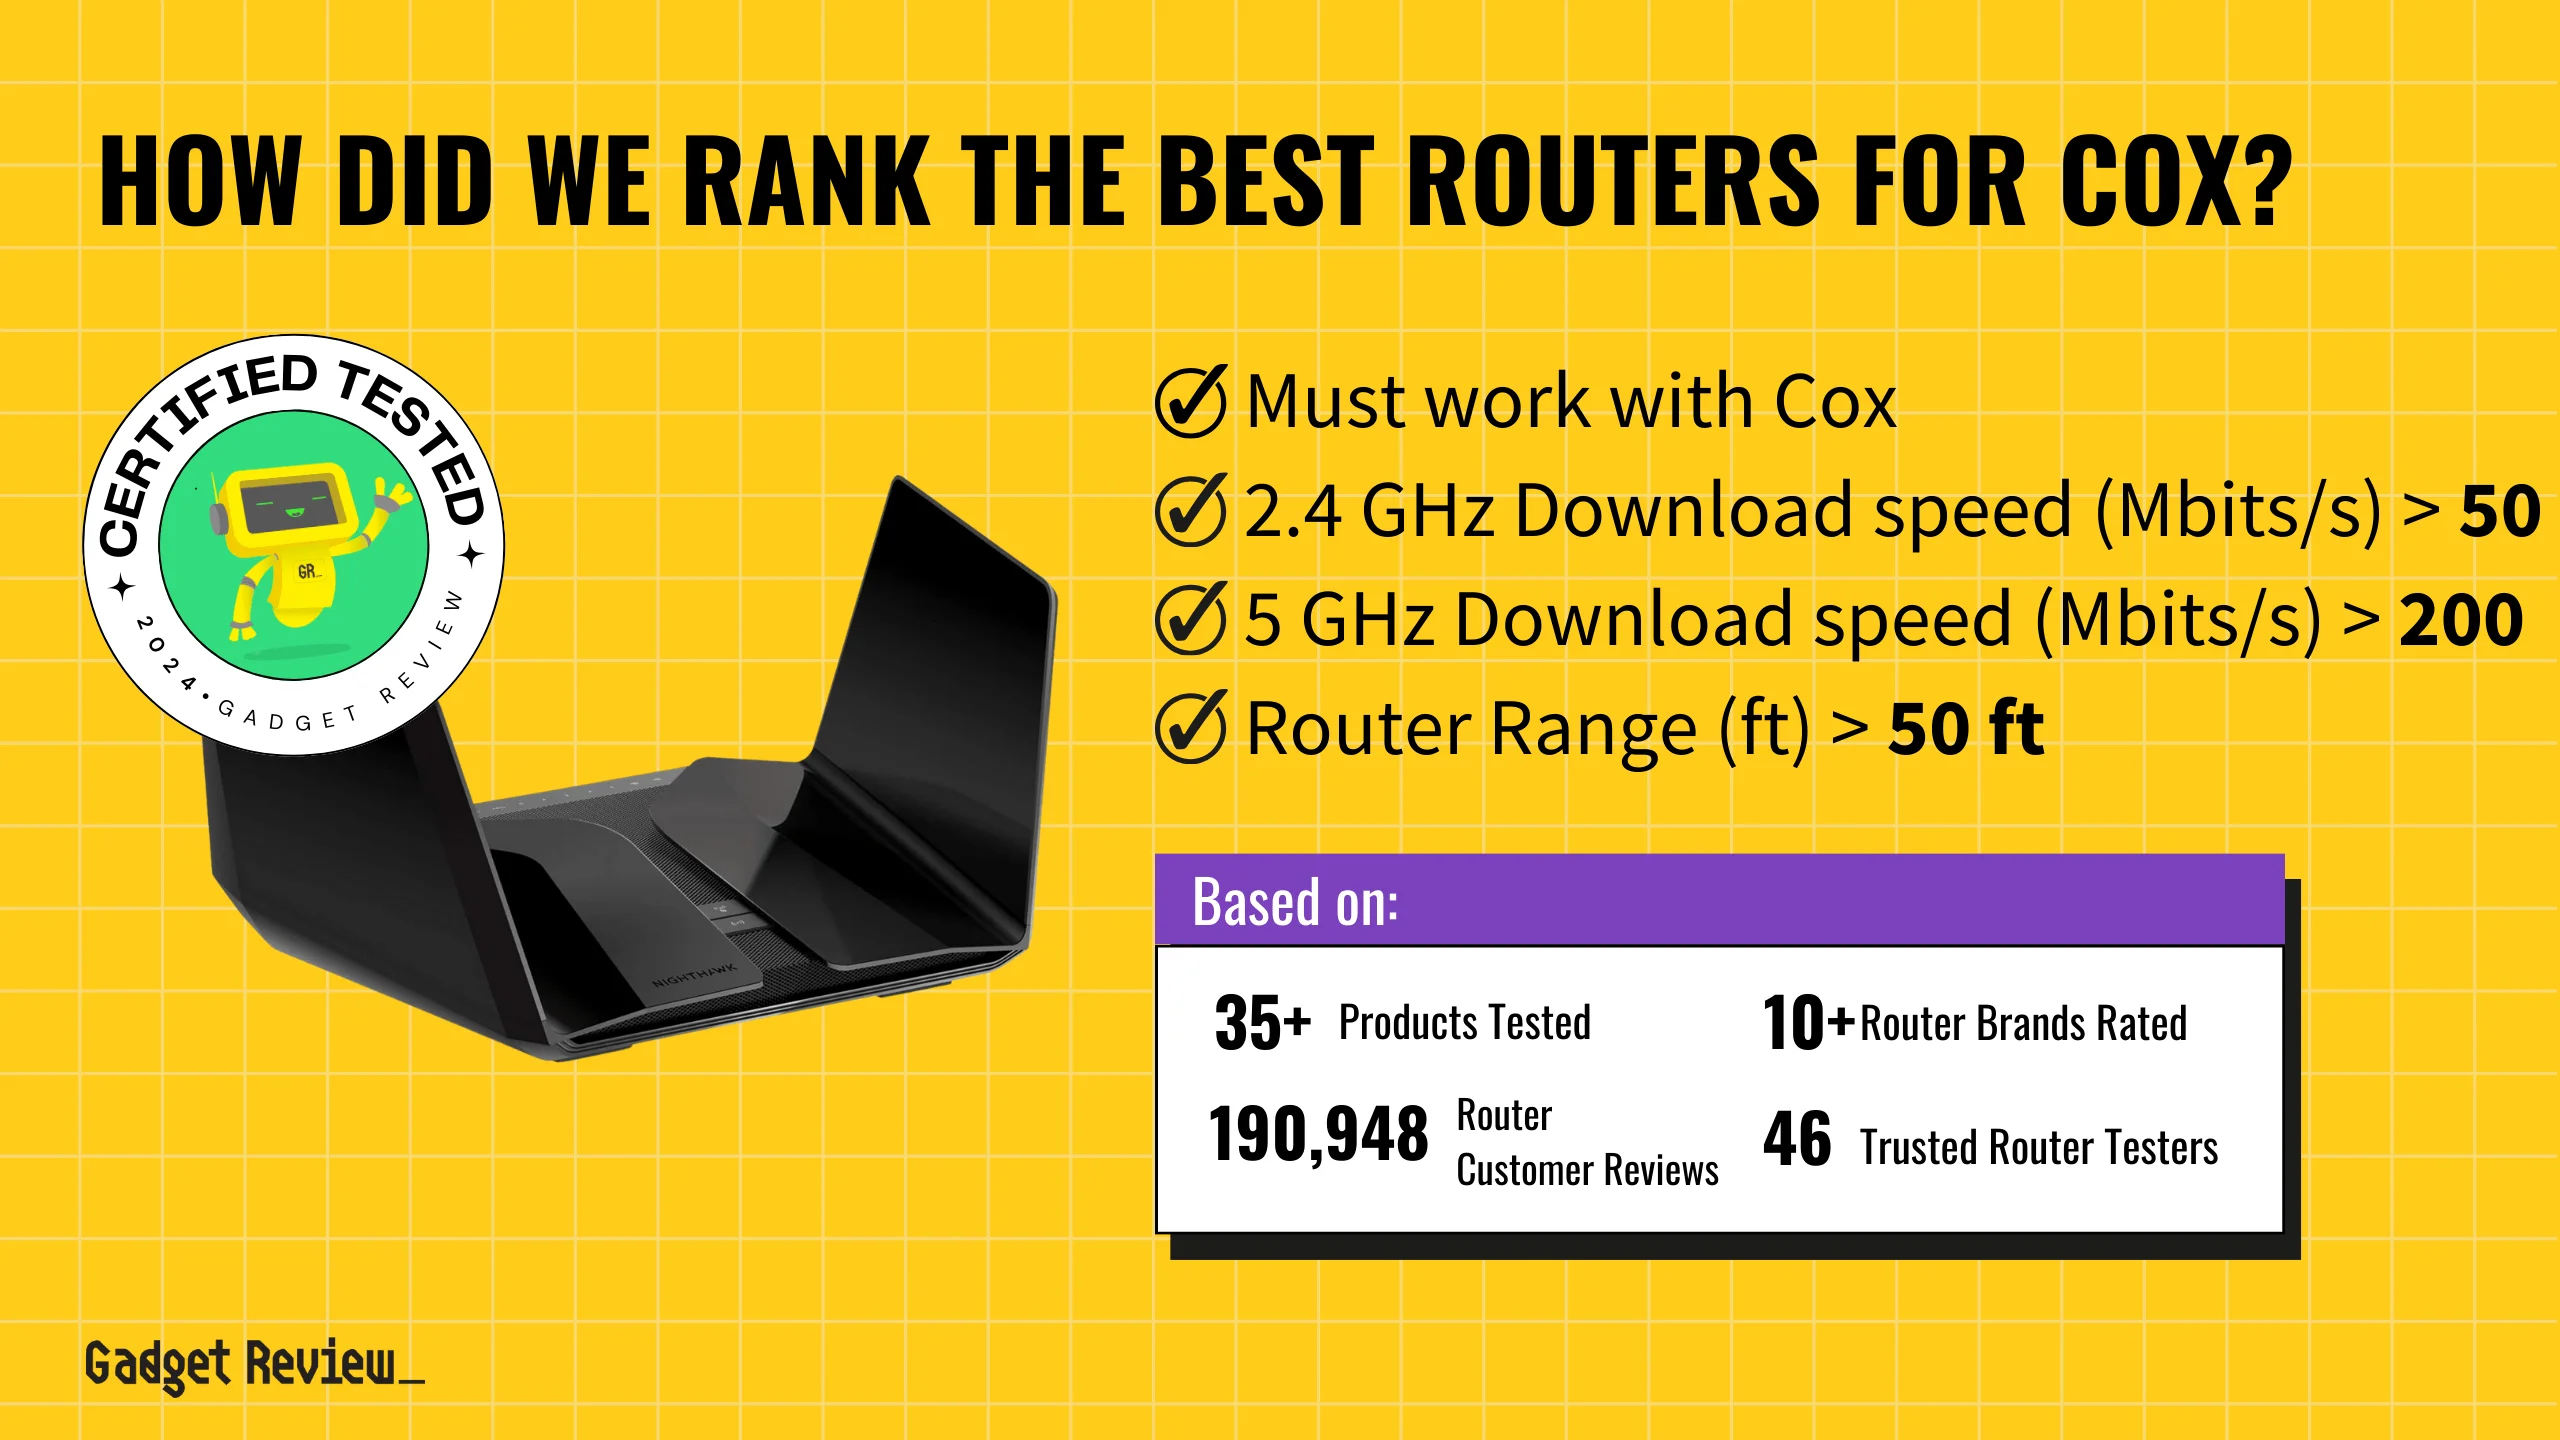 We Ranked the 5 Best Routers for Cox